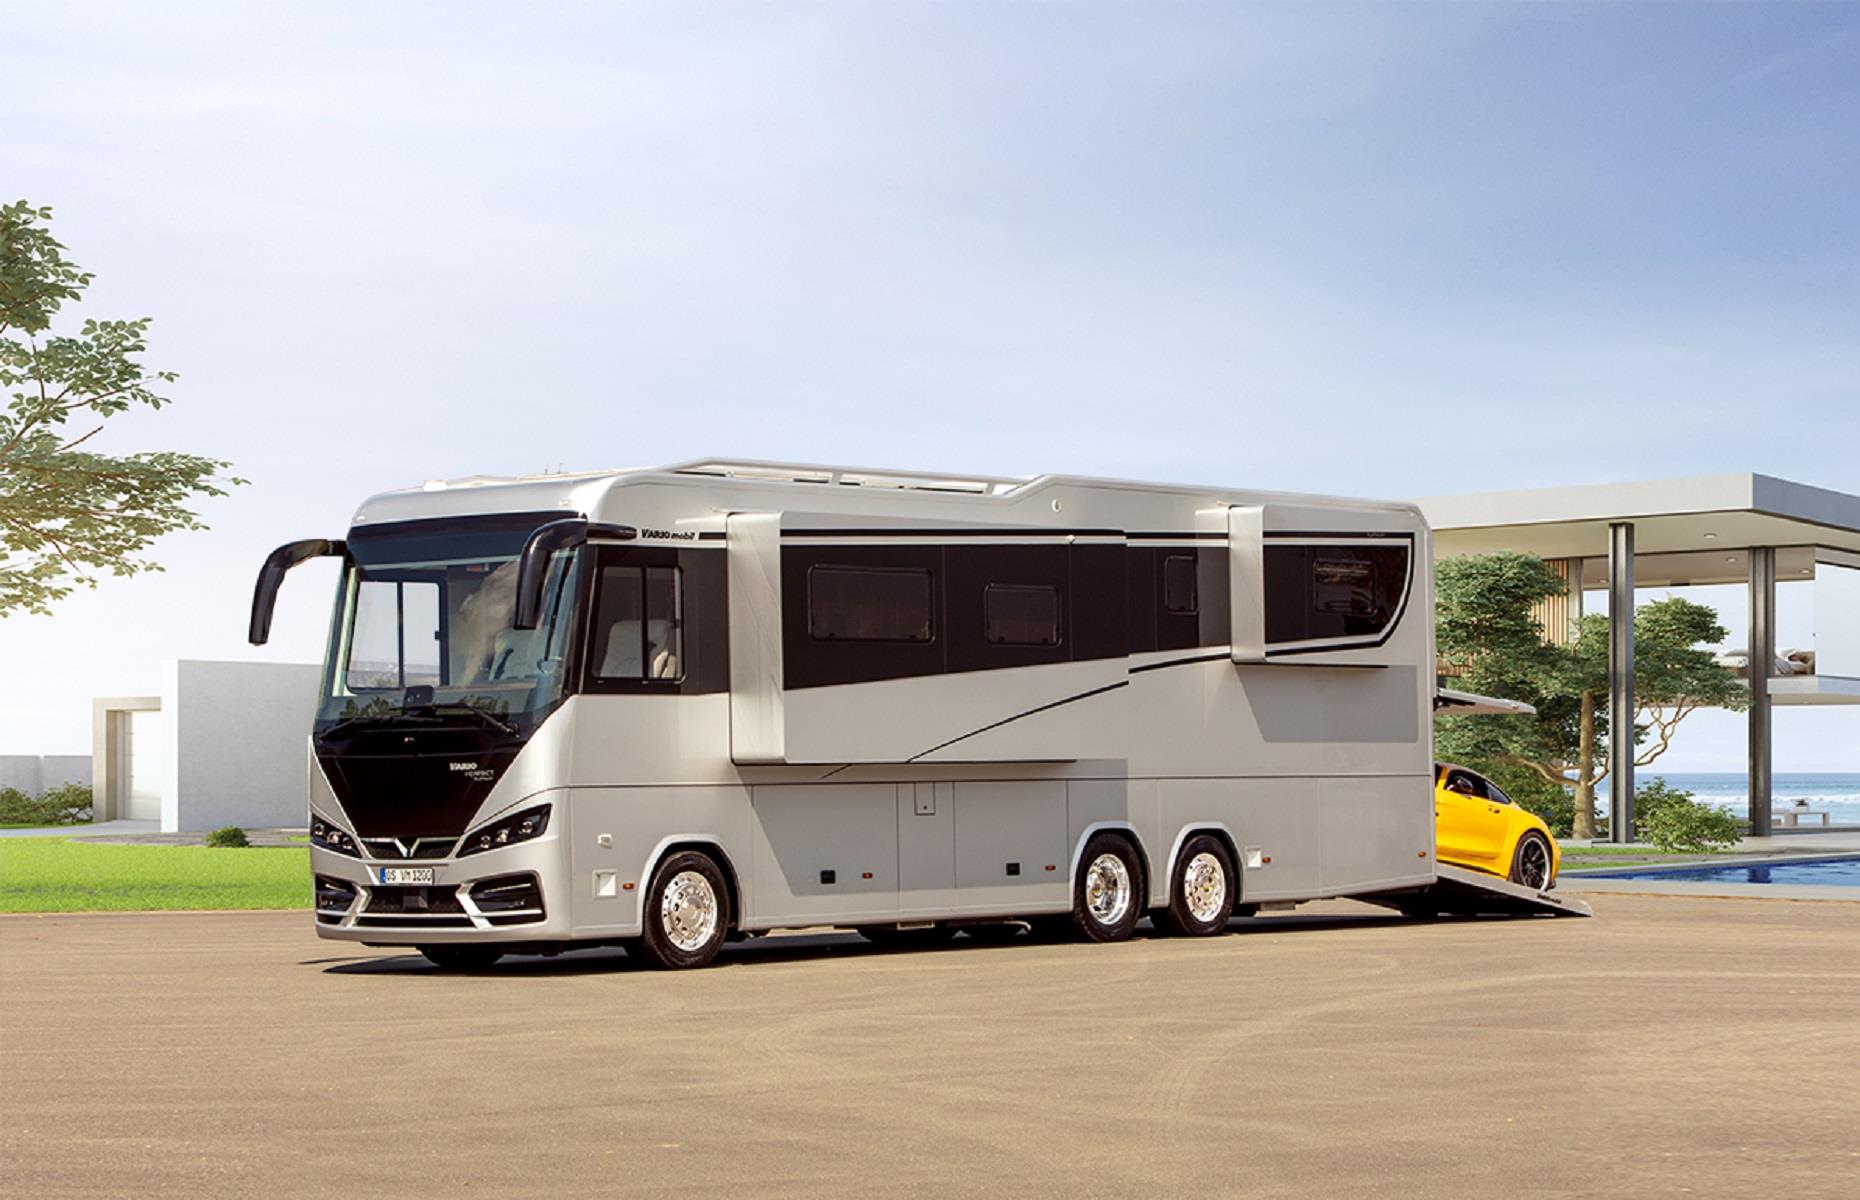 <p>One of the most customisable motorhomes on the market is the <a href="https://vario-mobil.com/perfect/">Vario Perfect 1200 Platinum</a>, by German manufacturer VARIOmobil. Built using the highest quality materials, this luxe RV is made to order to your exacting specifications with a <a href="https://vario-mobil.com/wp-content/uploads/2023/01/en_2023.1.0_price-list-VARIOmobil_motorhomes_technical-data_options.pdf">base price</a> of €1.1 million, around $1.2 million. But, the plentiful features and deluxe extras can easily push the price significantly higher.</p>